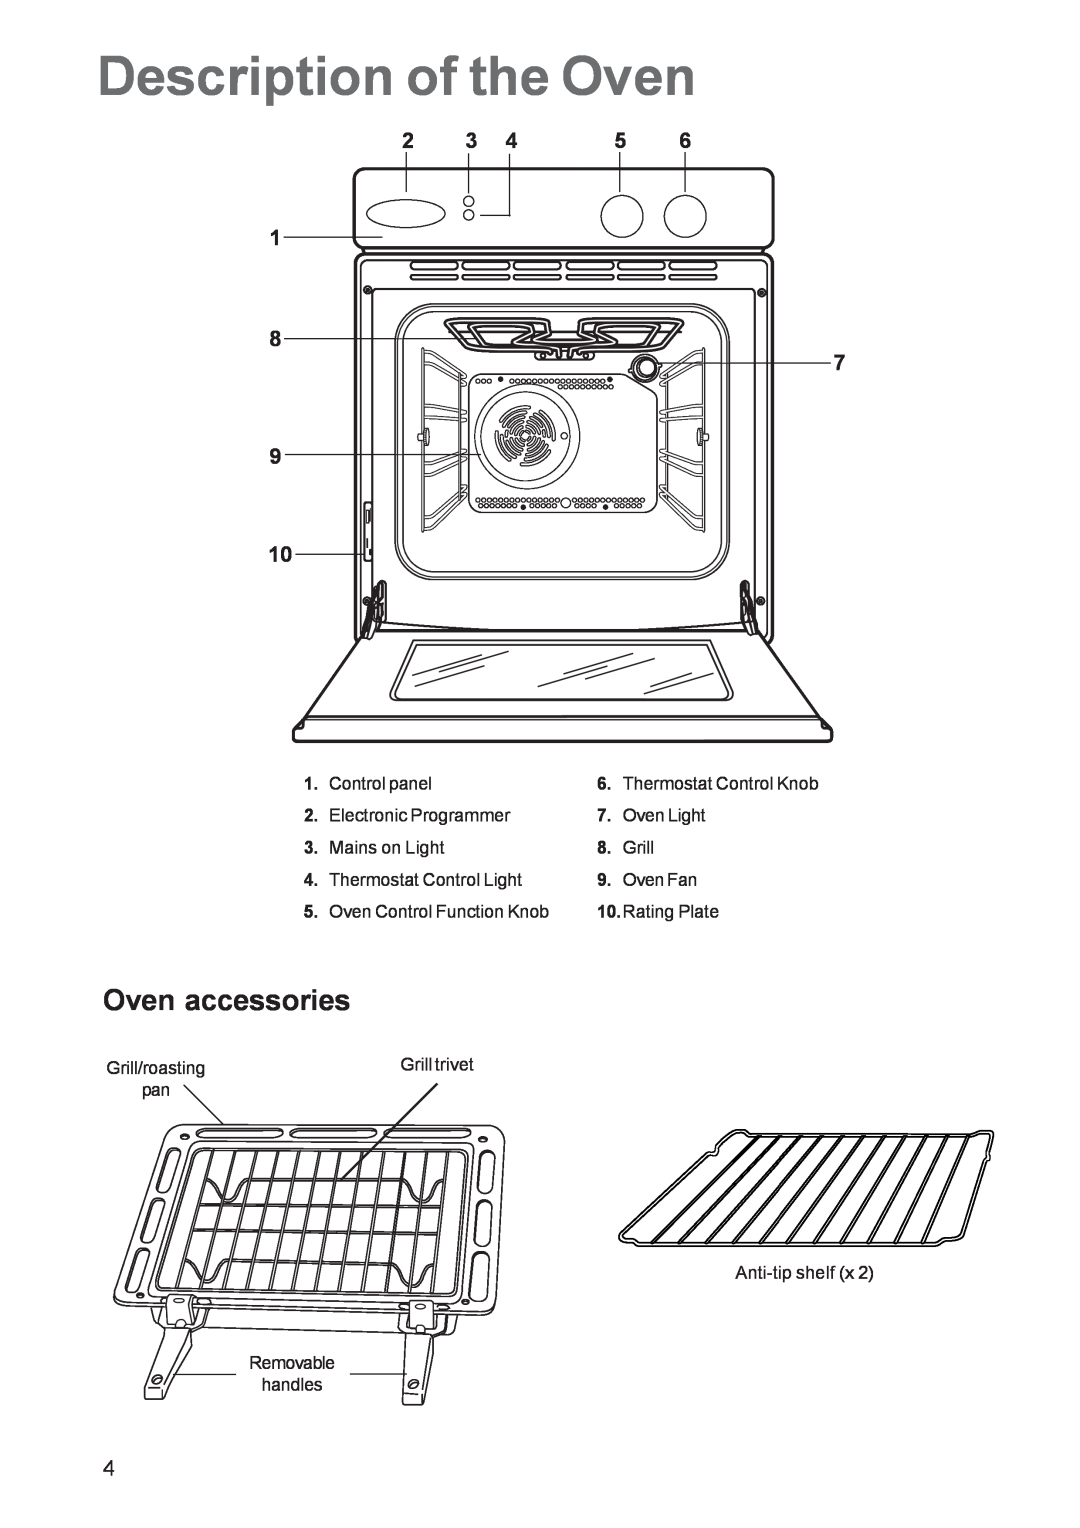 Zanussi ZBS 663 Description of the Oven, Oven accessories, Control panel, Thermostat Control Knob, Electronic Programmer 